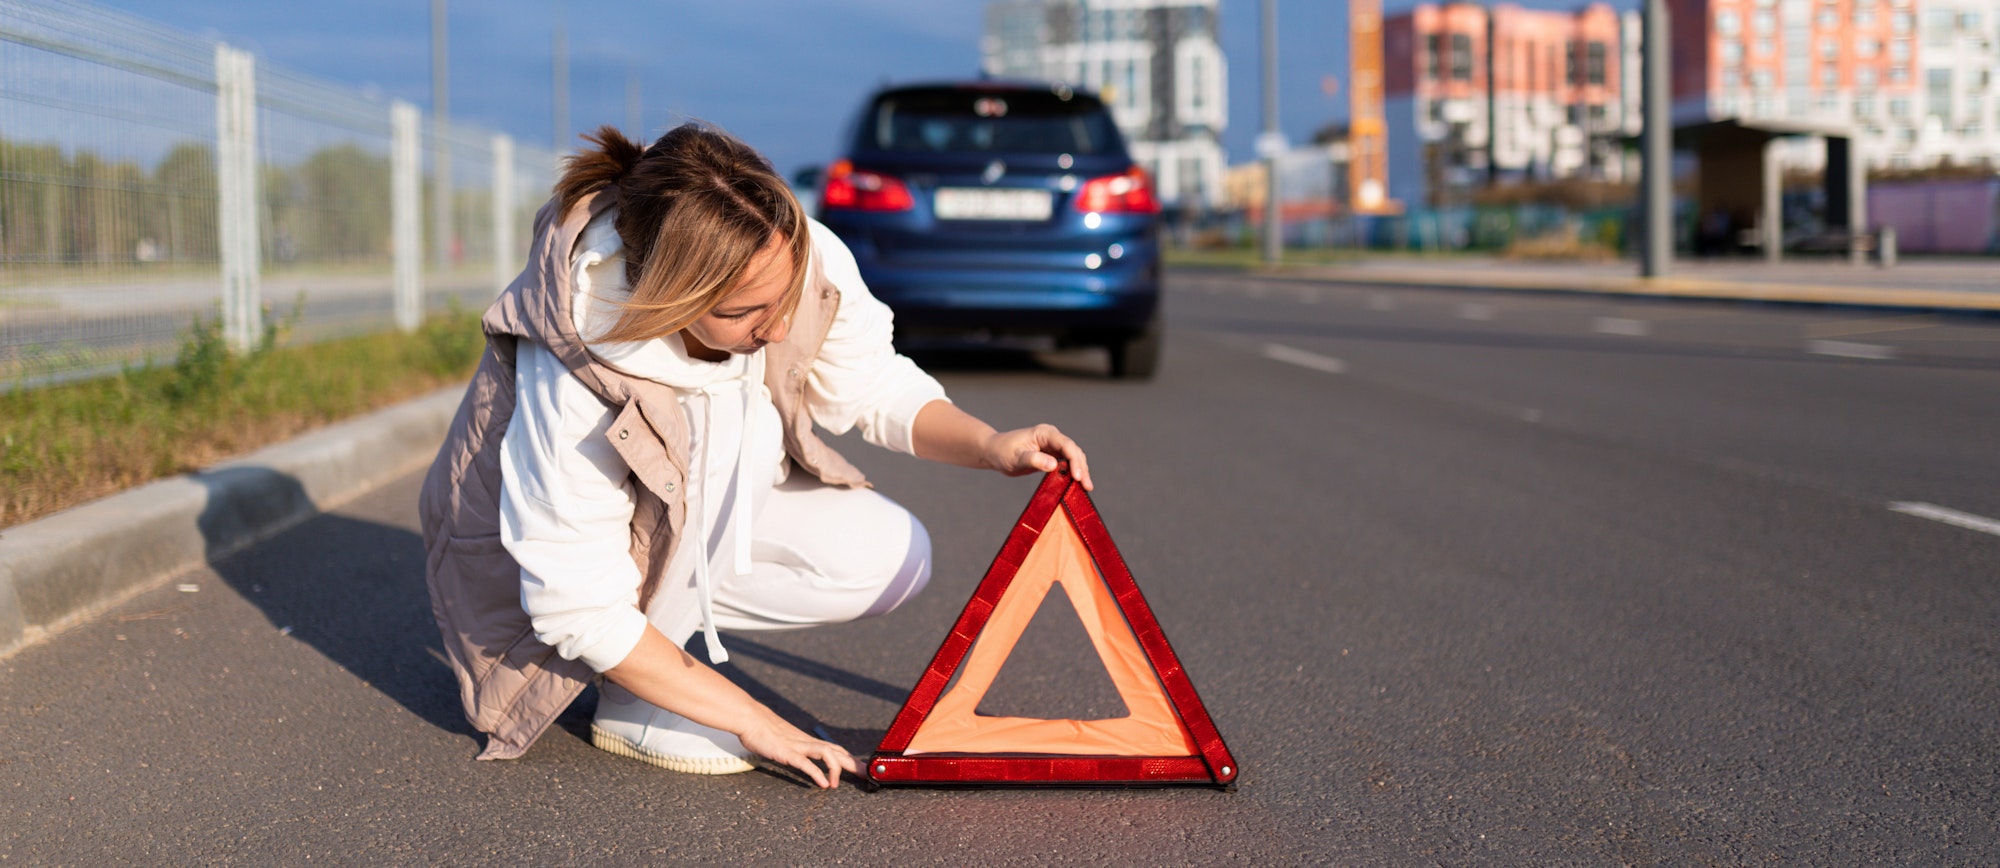 a woman driver puts an emergency stop sign near a broken car, traffic accident concept